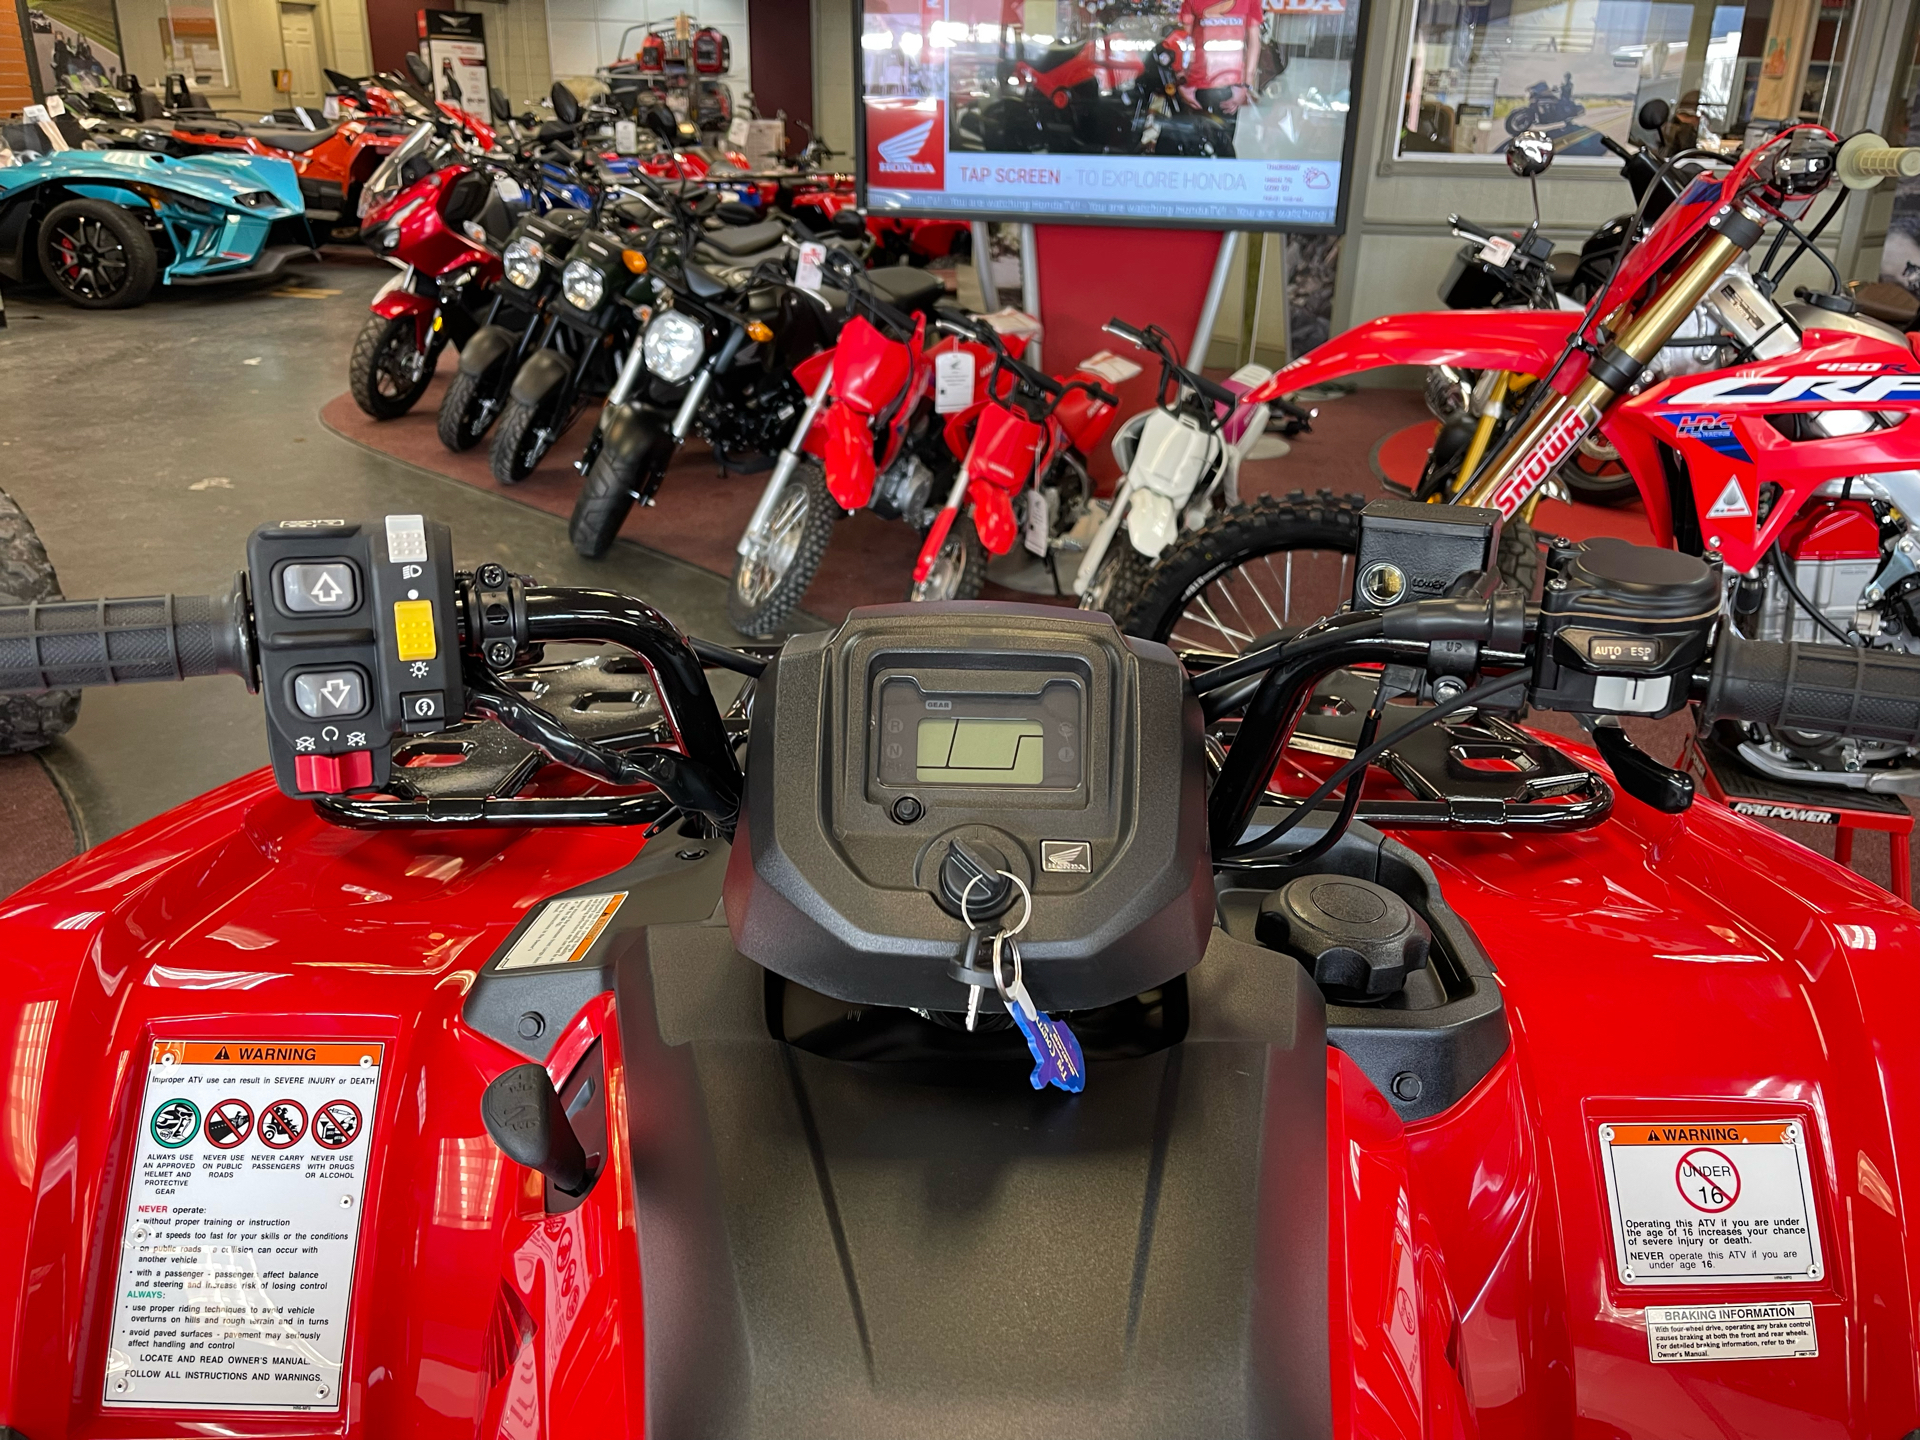 2023 Honda FourTrax Rancher 4x4 Automatic DCT IRS in Petersburg, West Virginia - Photo 6